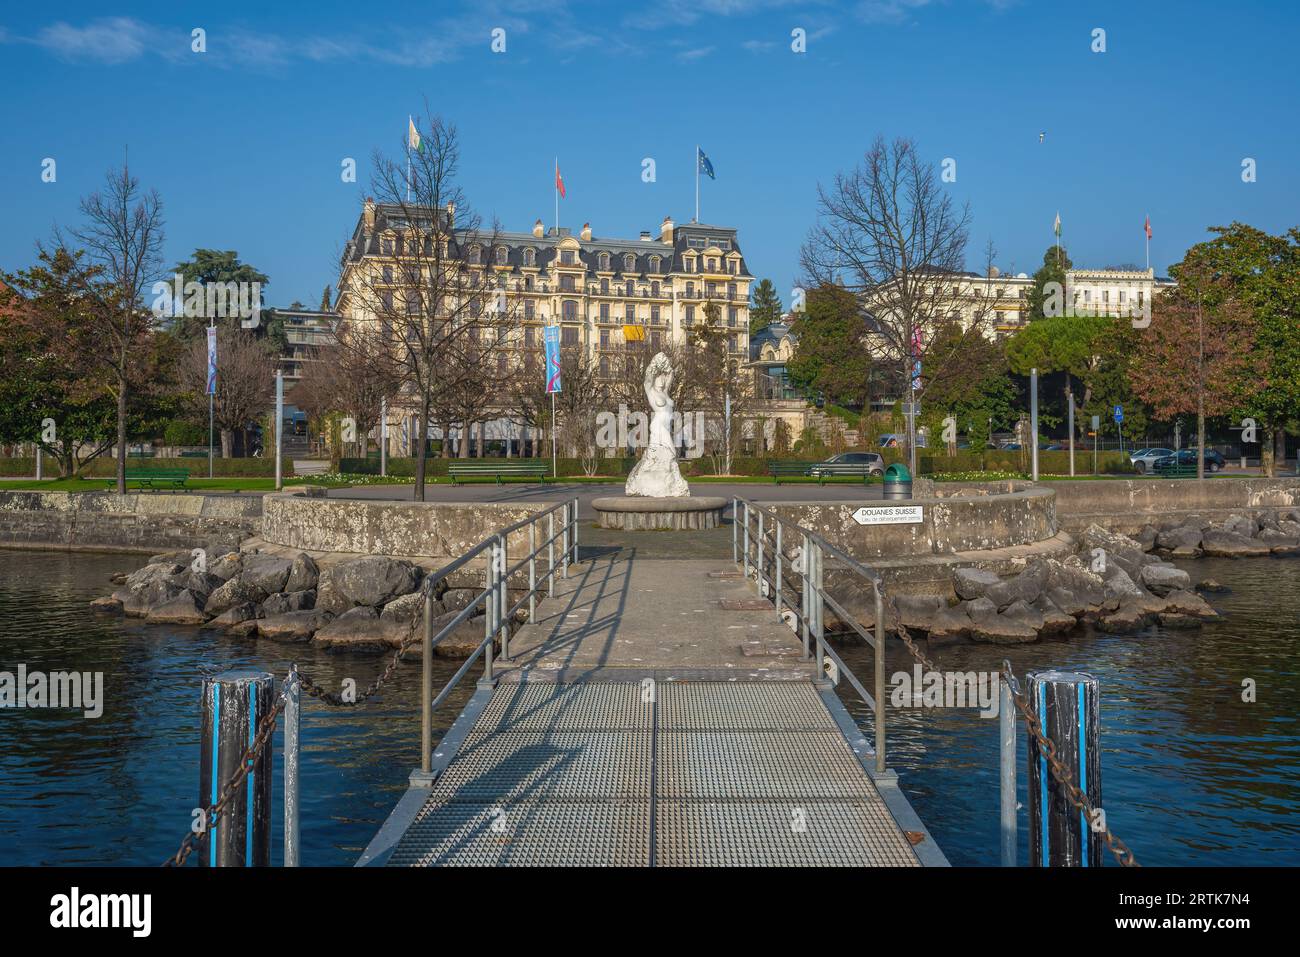 Place du Vieux-Port Fountain und Beau-Rivage Palace Hotel in Ouchy Promenade - Lausanne, Schweiz Stockfoto